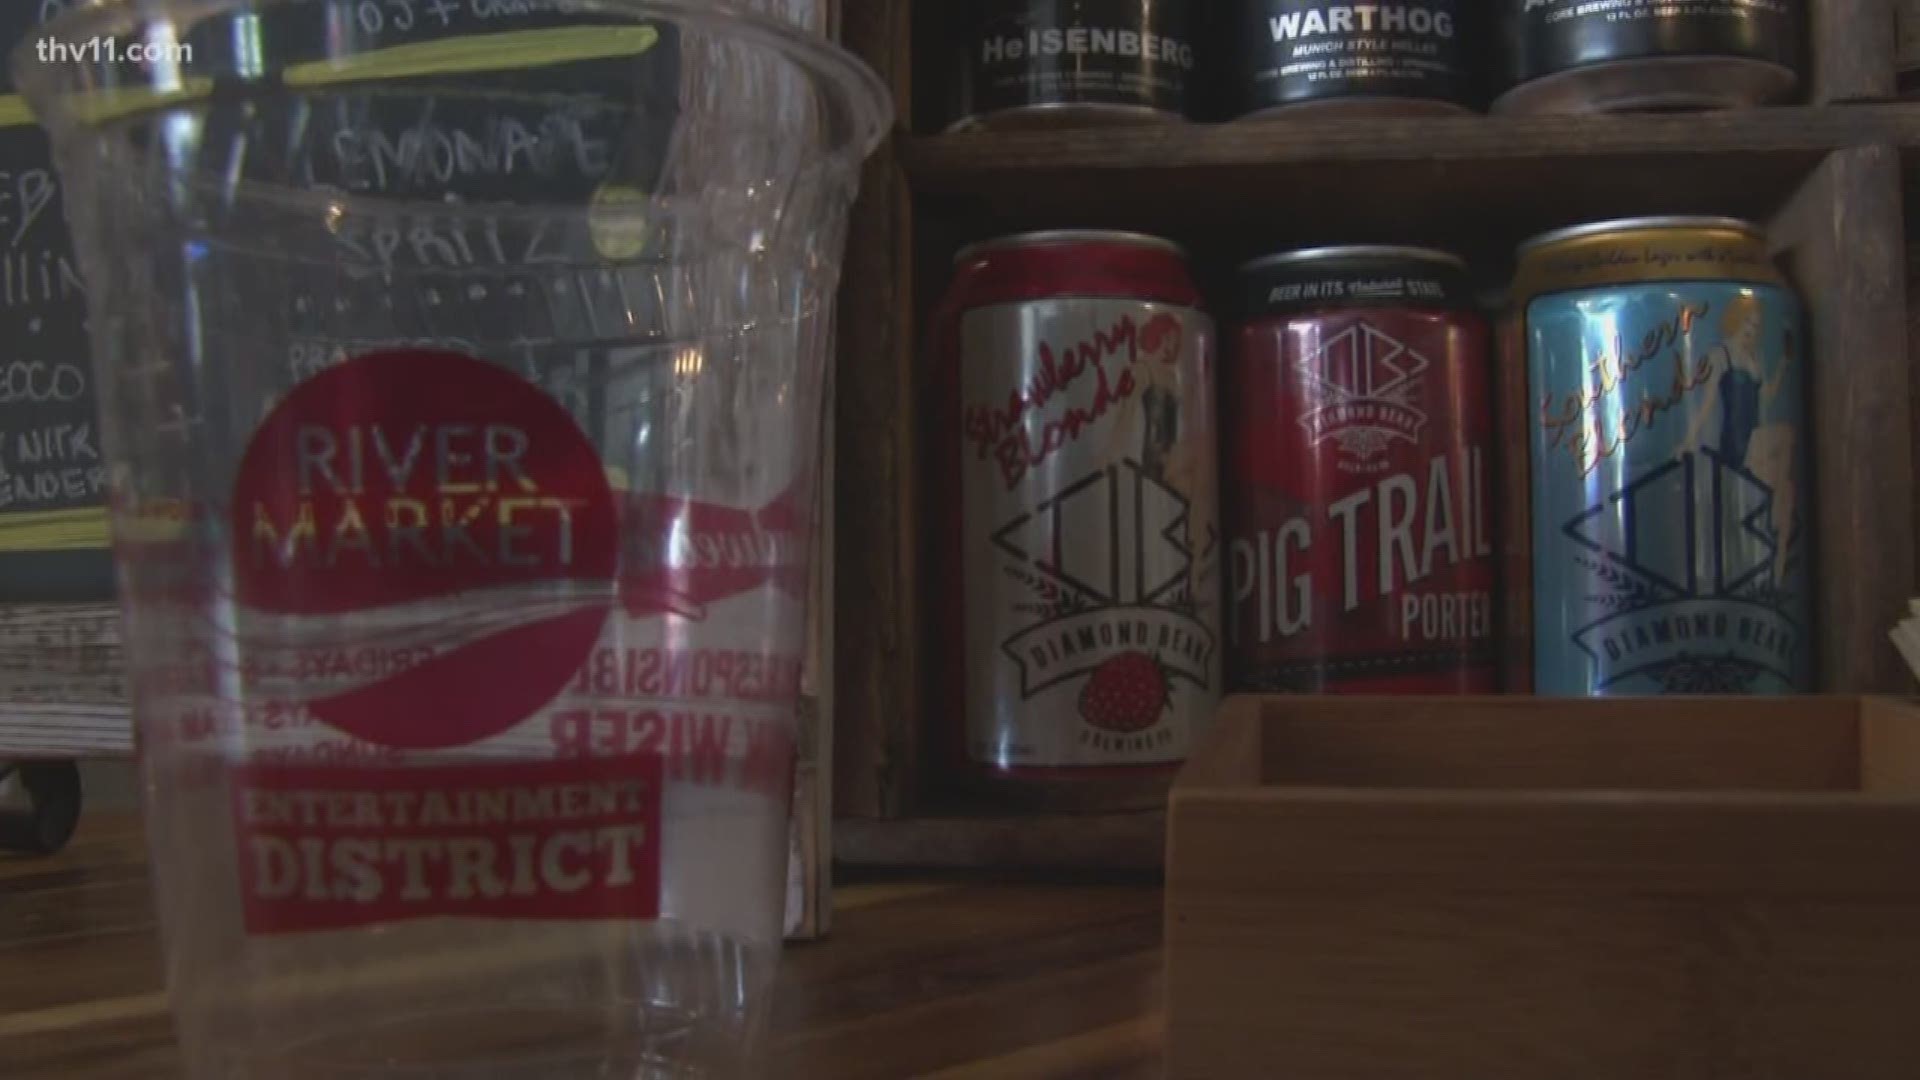 It's been an hour since Little Rock kicked off its newest River Market attraction, turning the area into an 'Entertainment District,' allowing drinking in the streets.